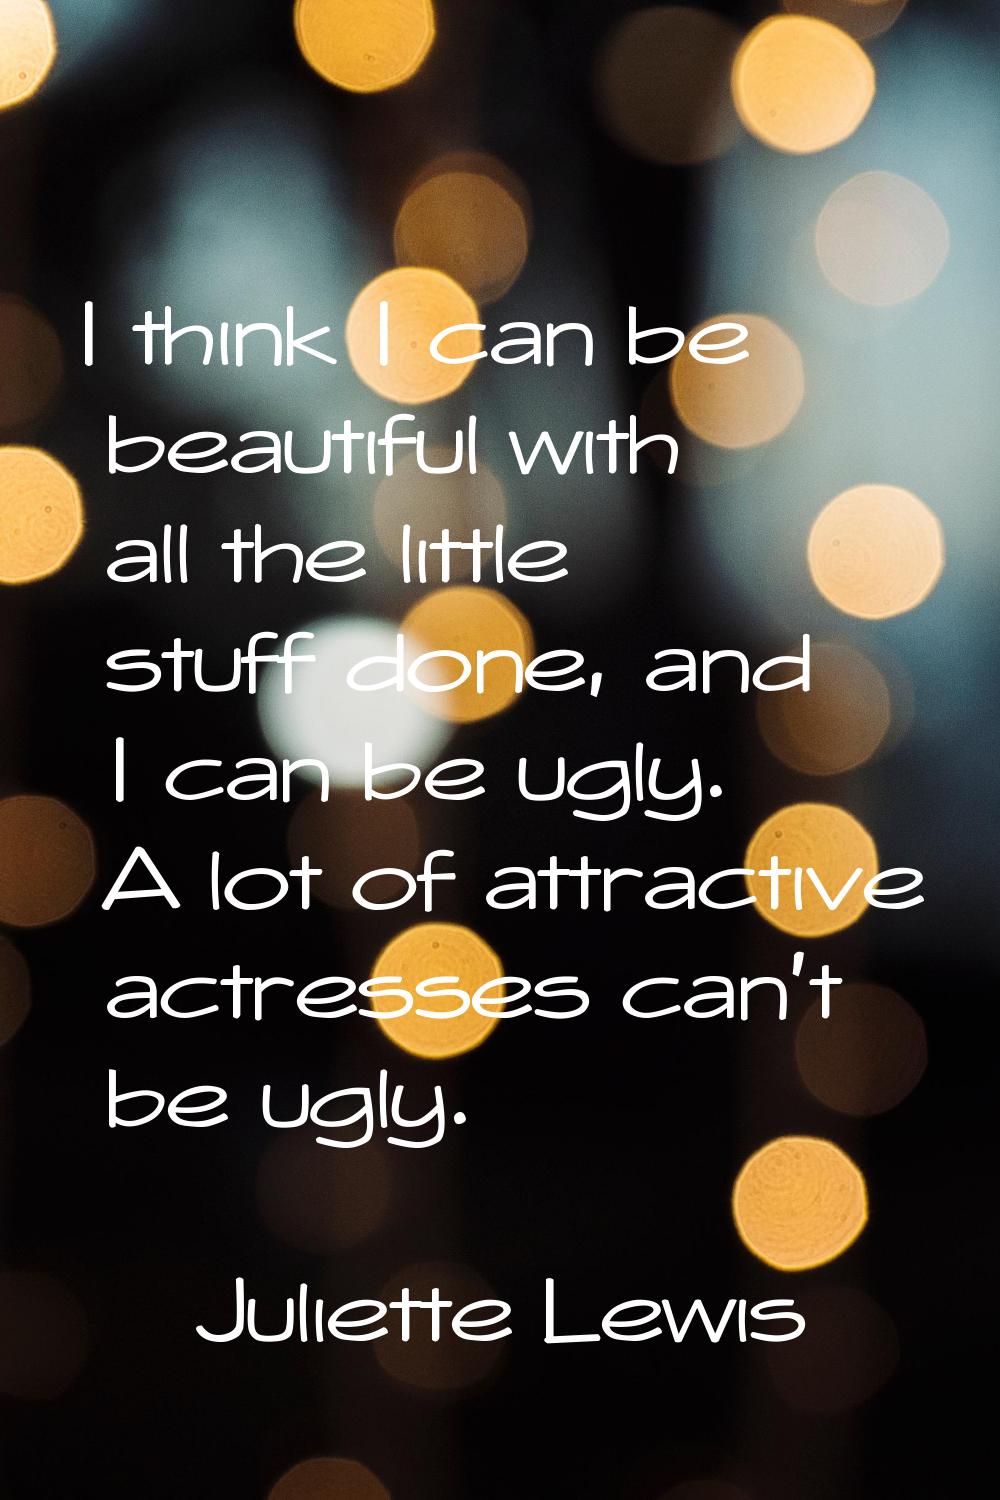 I think I can be beautiful with all the little stuff done, and I can be ugly. A lot of attractive a